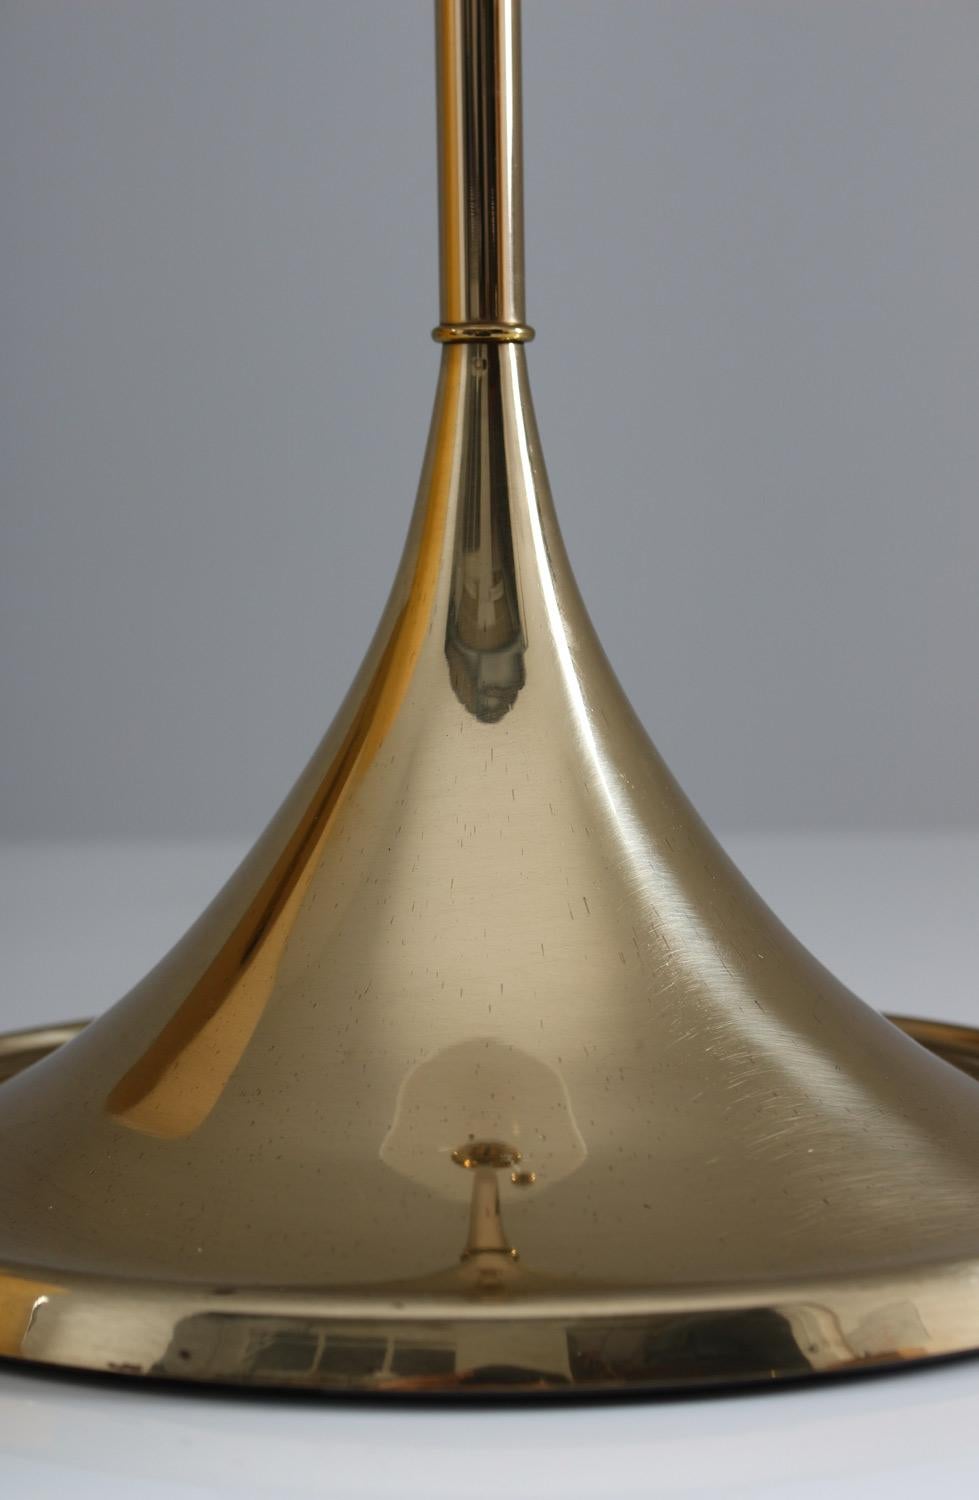 Midcentury Table Lamps in Brass by A. Svensson and Y. Sandström for Bergboms 4